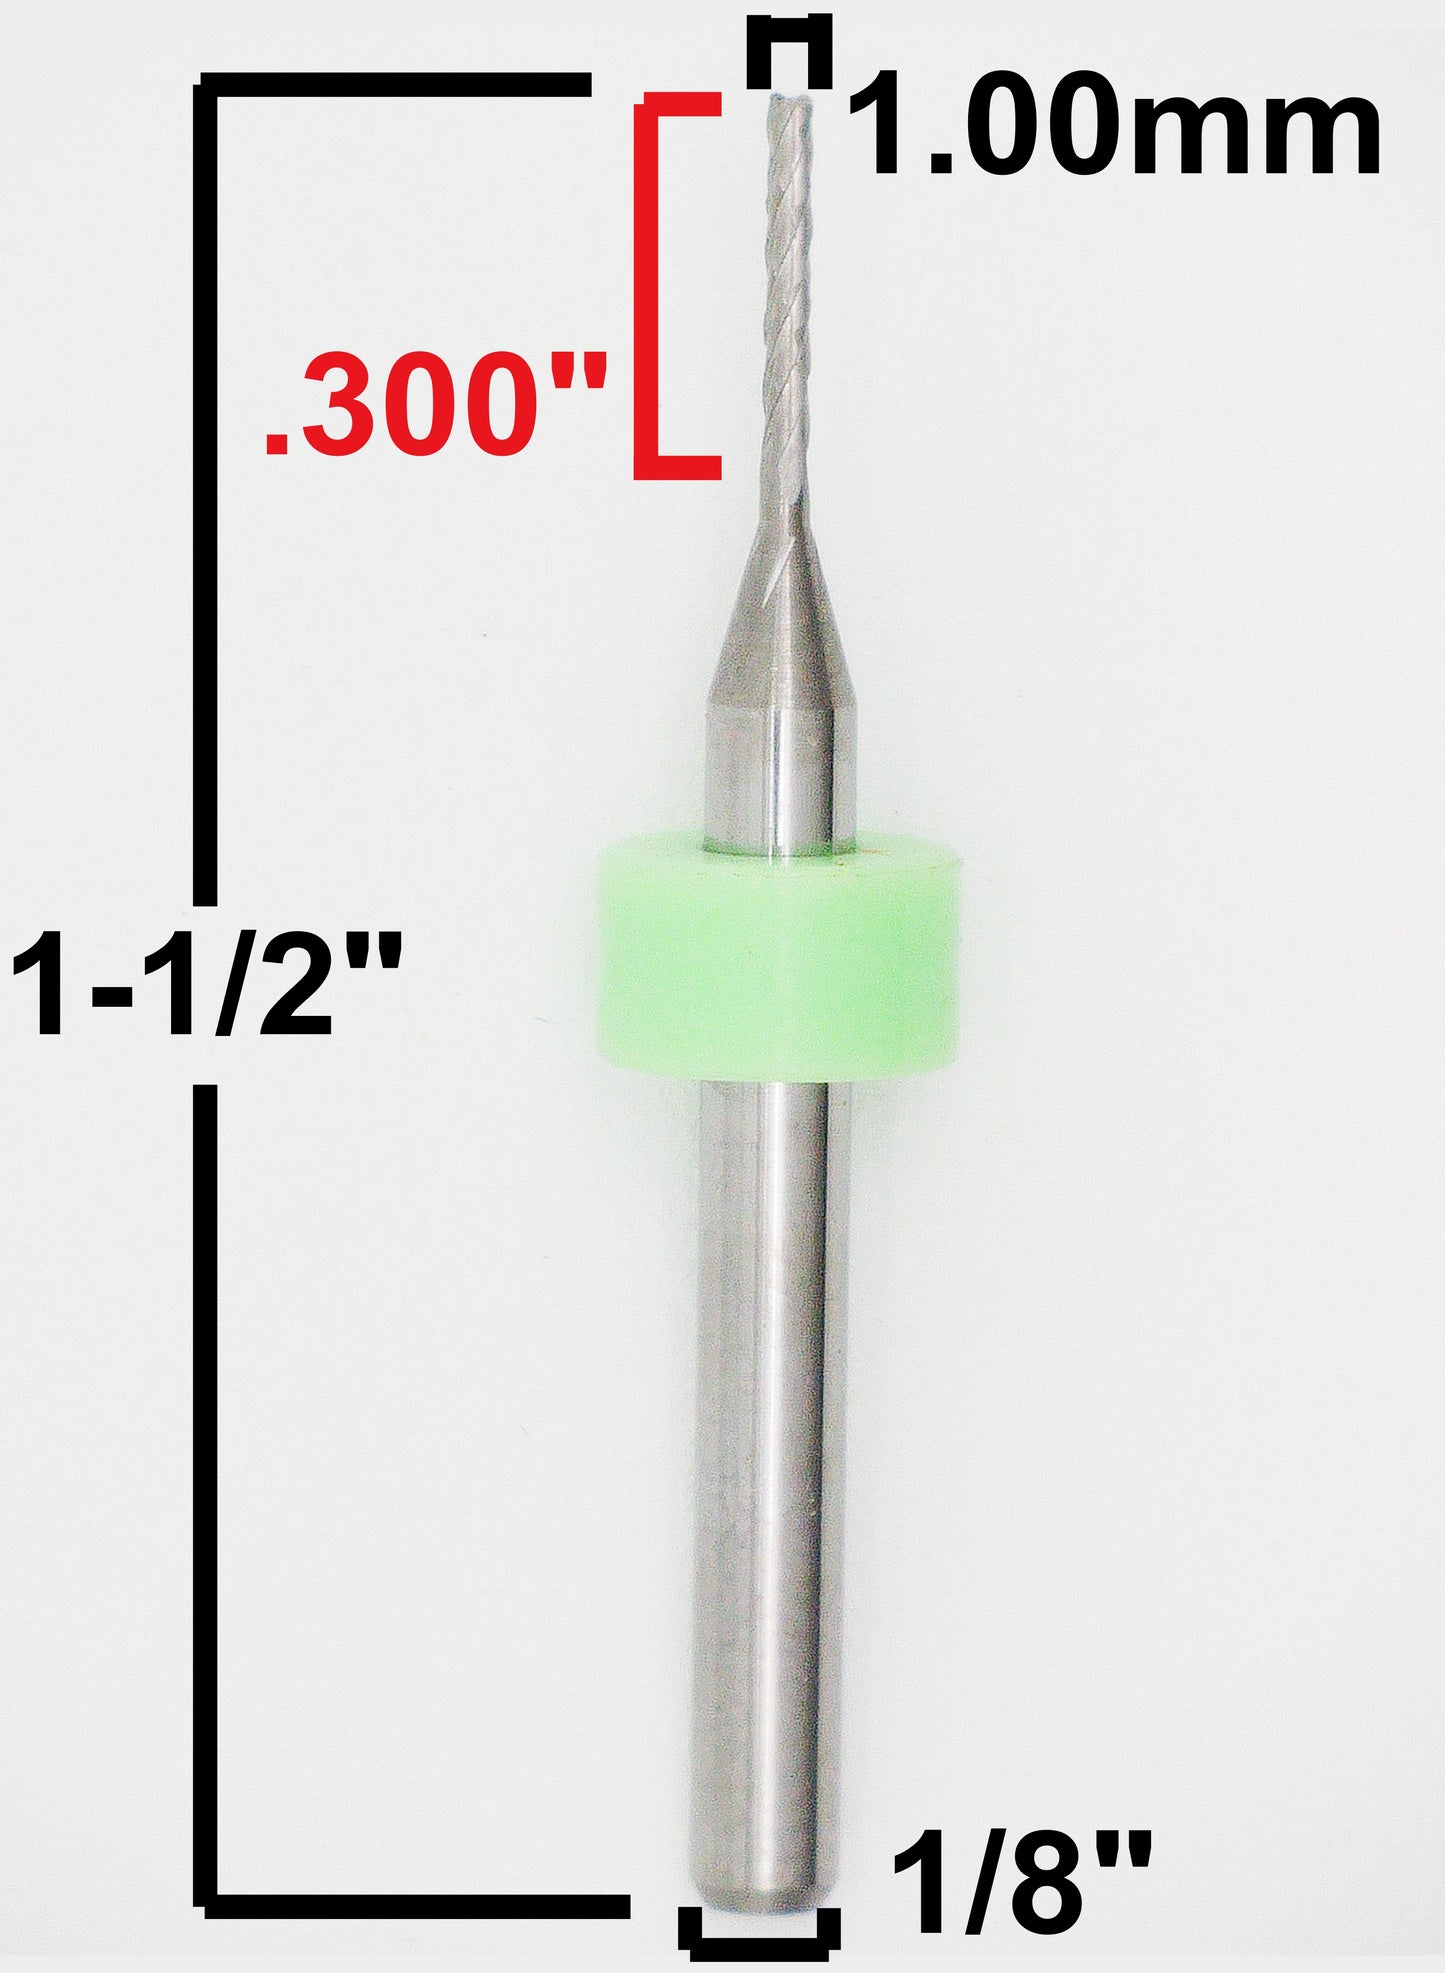 Fifty Pieces 1.00mm Router Bits Diamond Flutes 1/8" Shanks Fish Tail Tip - Up Cut Solid Carbide - Super Value - URD116